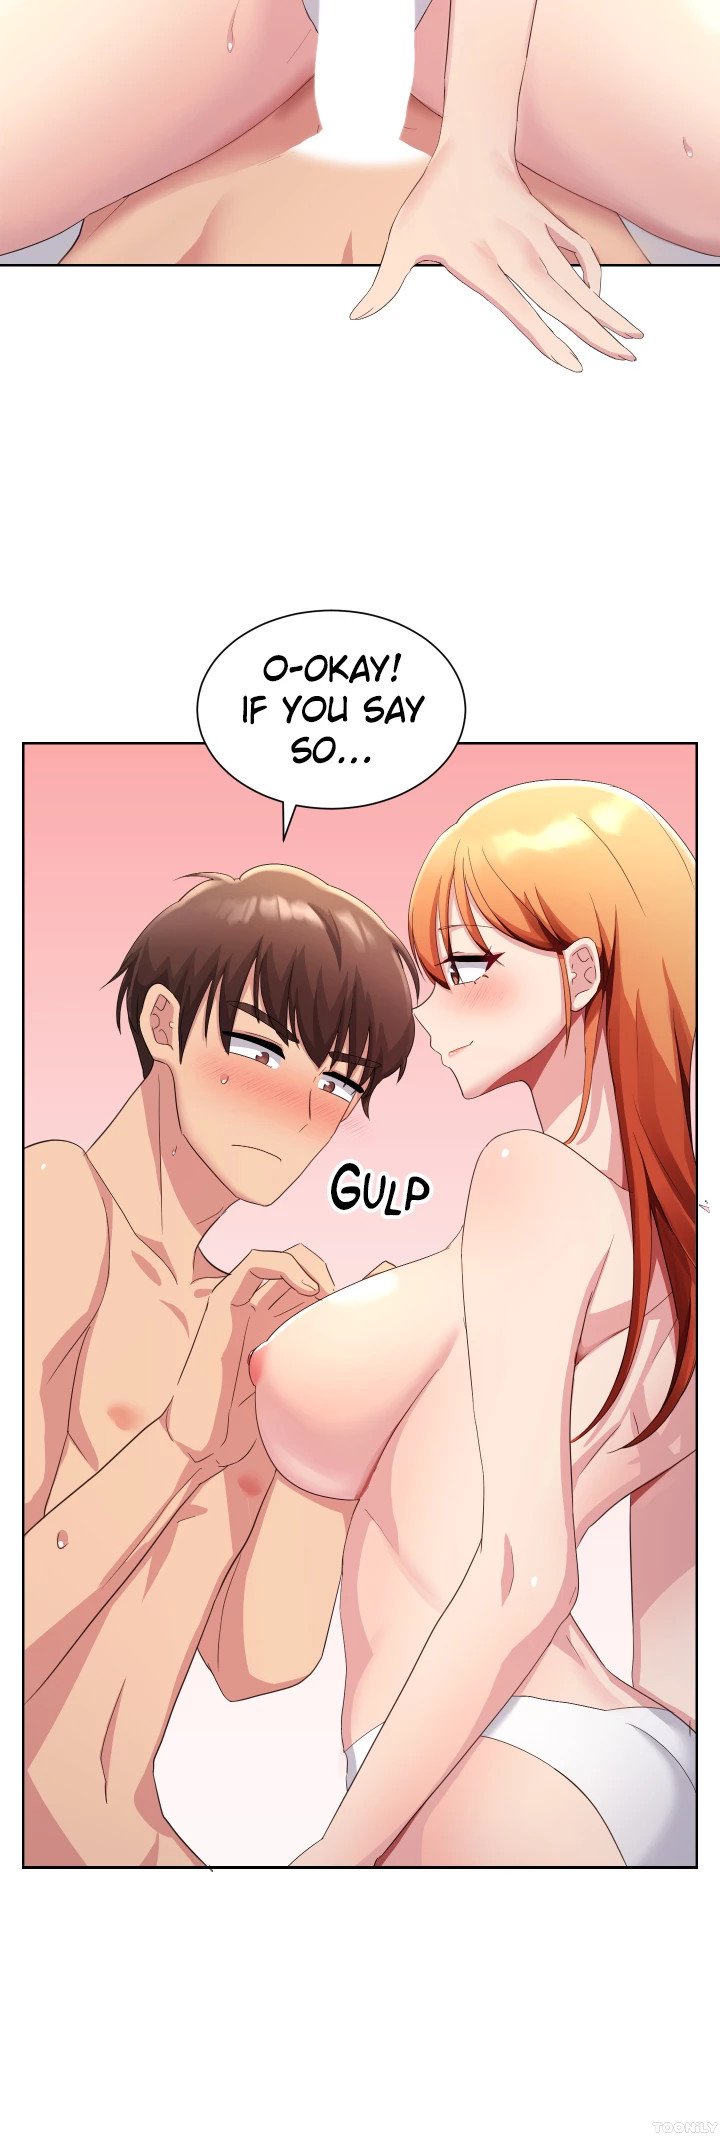 girls-i-used-to-teach-chap-4-22